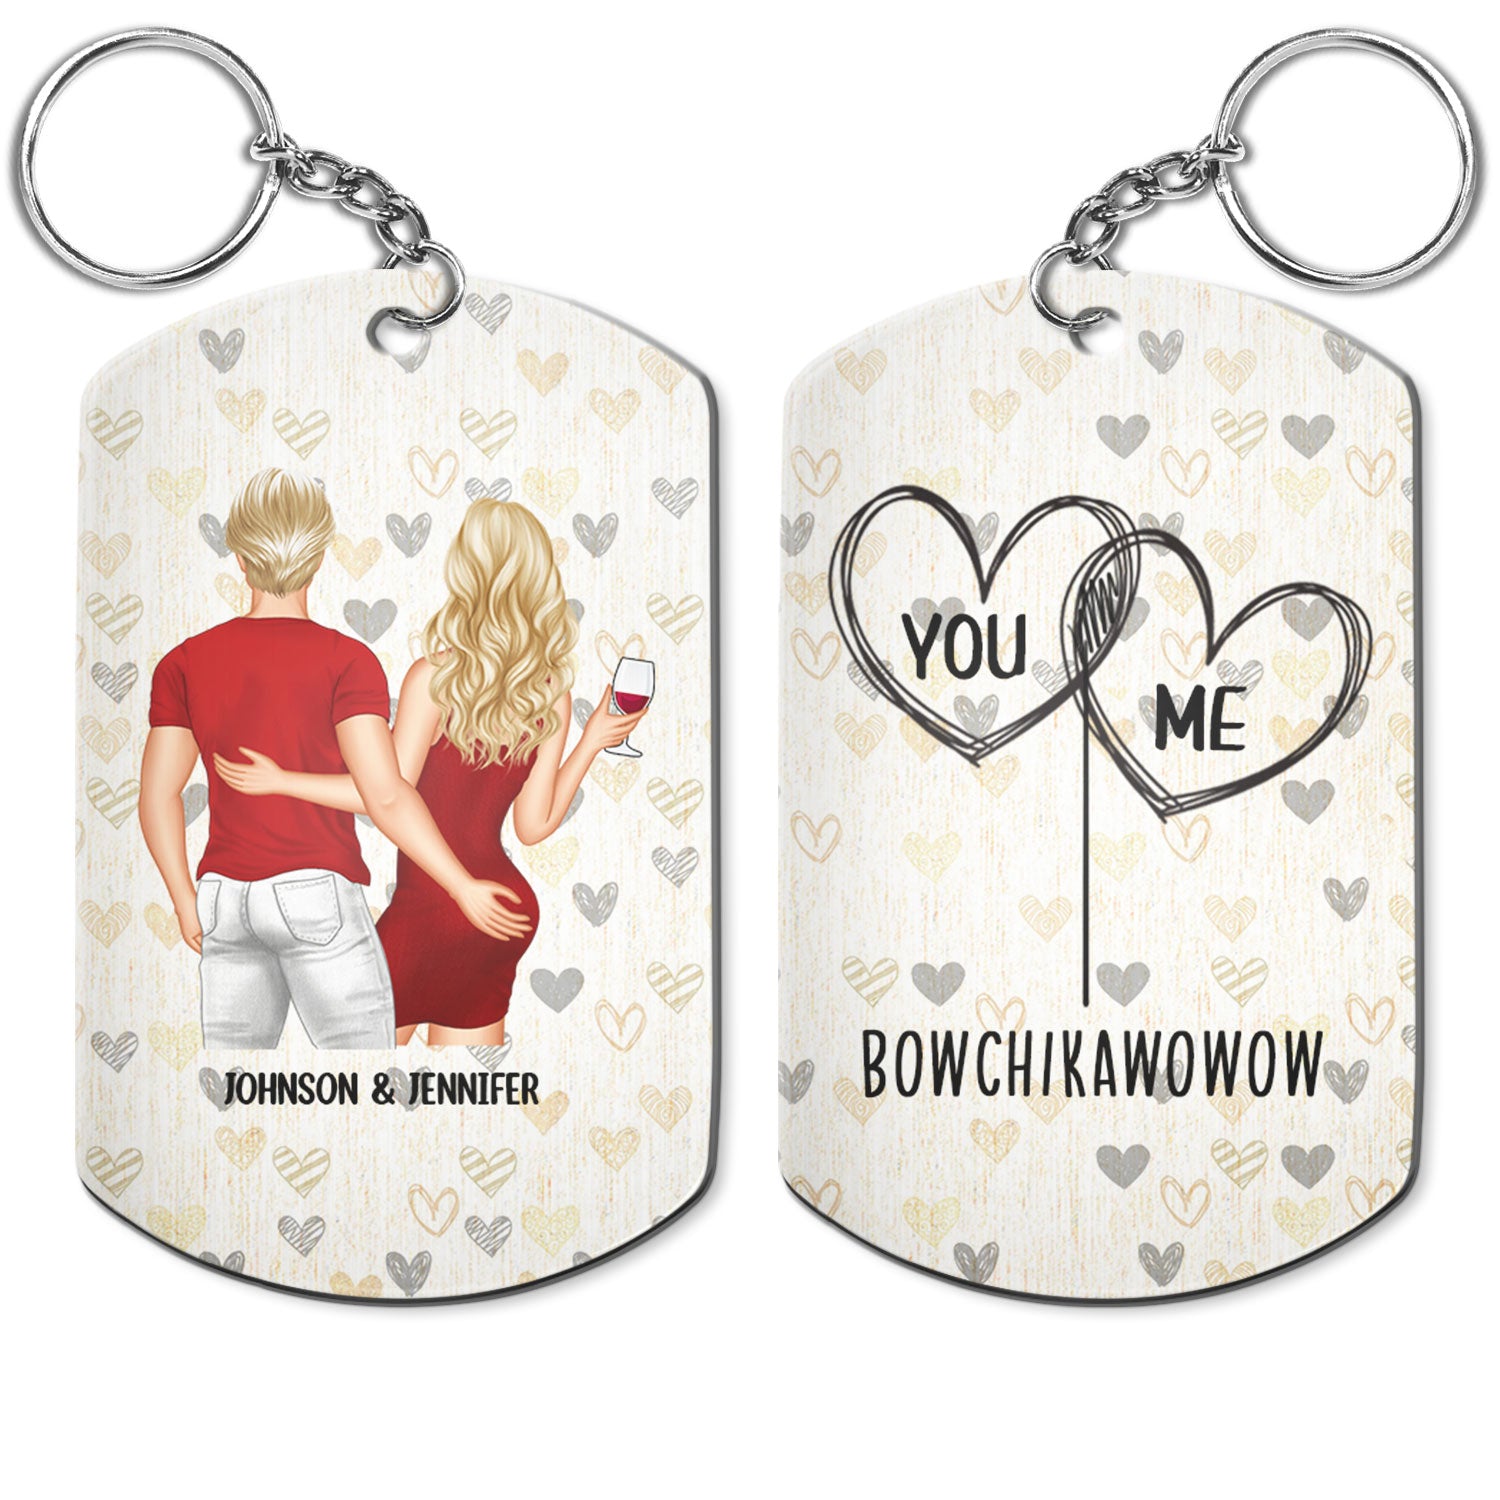 You And Me Bowchikawowow - Gift For Couples - Personalized Aluminum Keychain